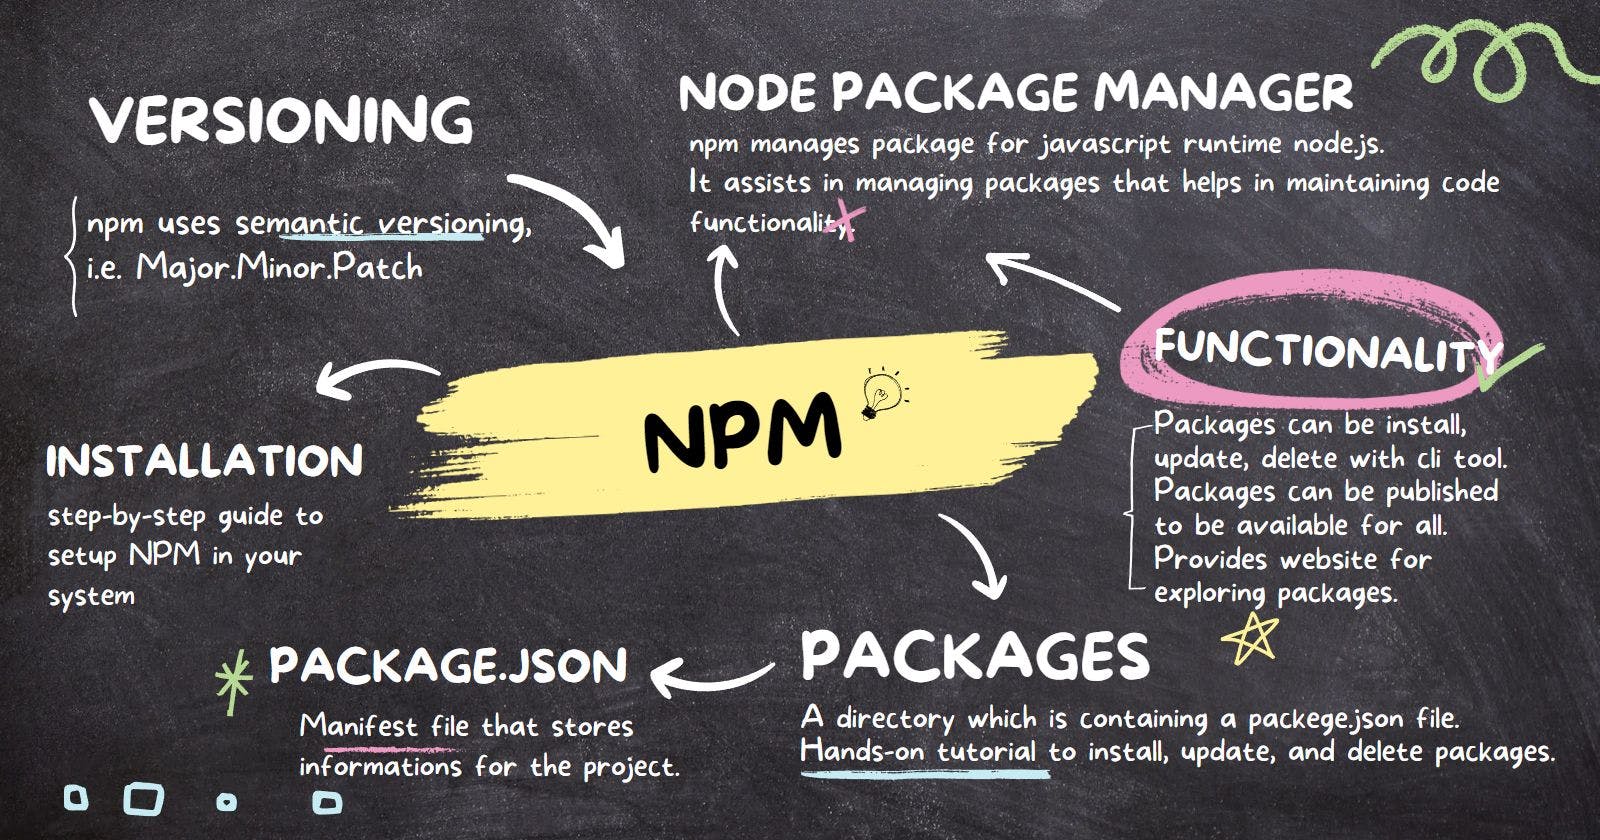 Everything that you need to know about NPM and Packages